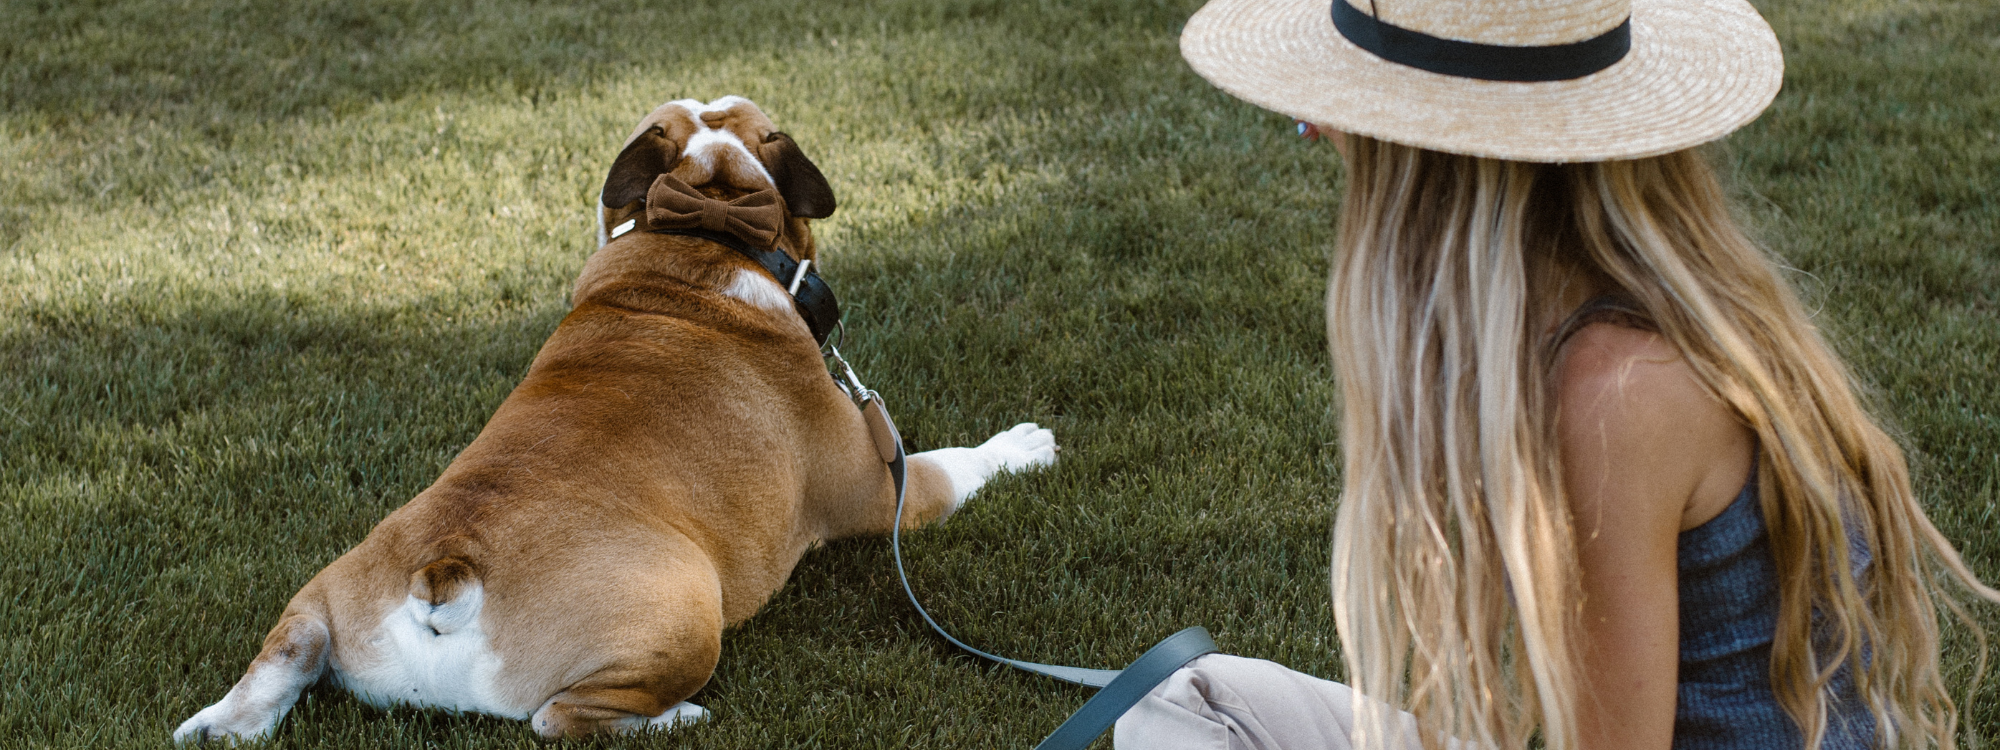 6 Tips to Make Your Dog Happier during Pet Appreciation Week - maxbone